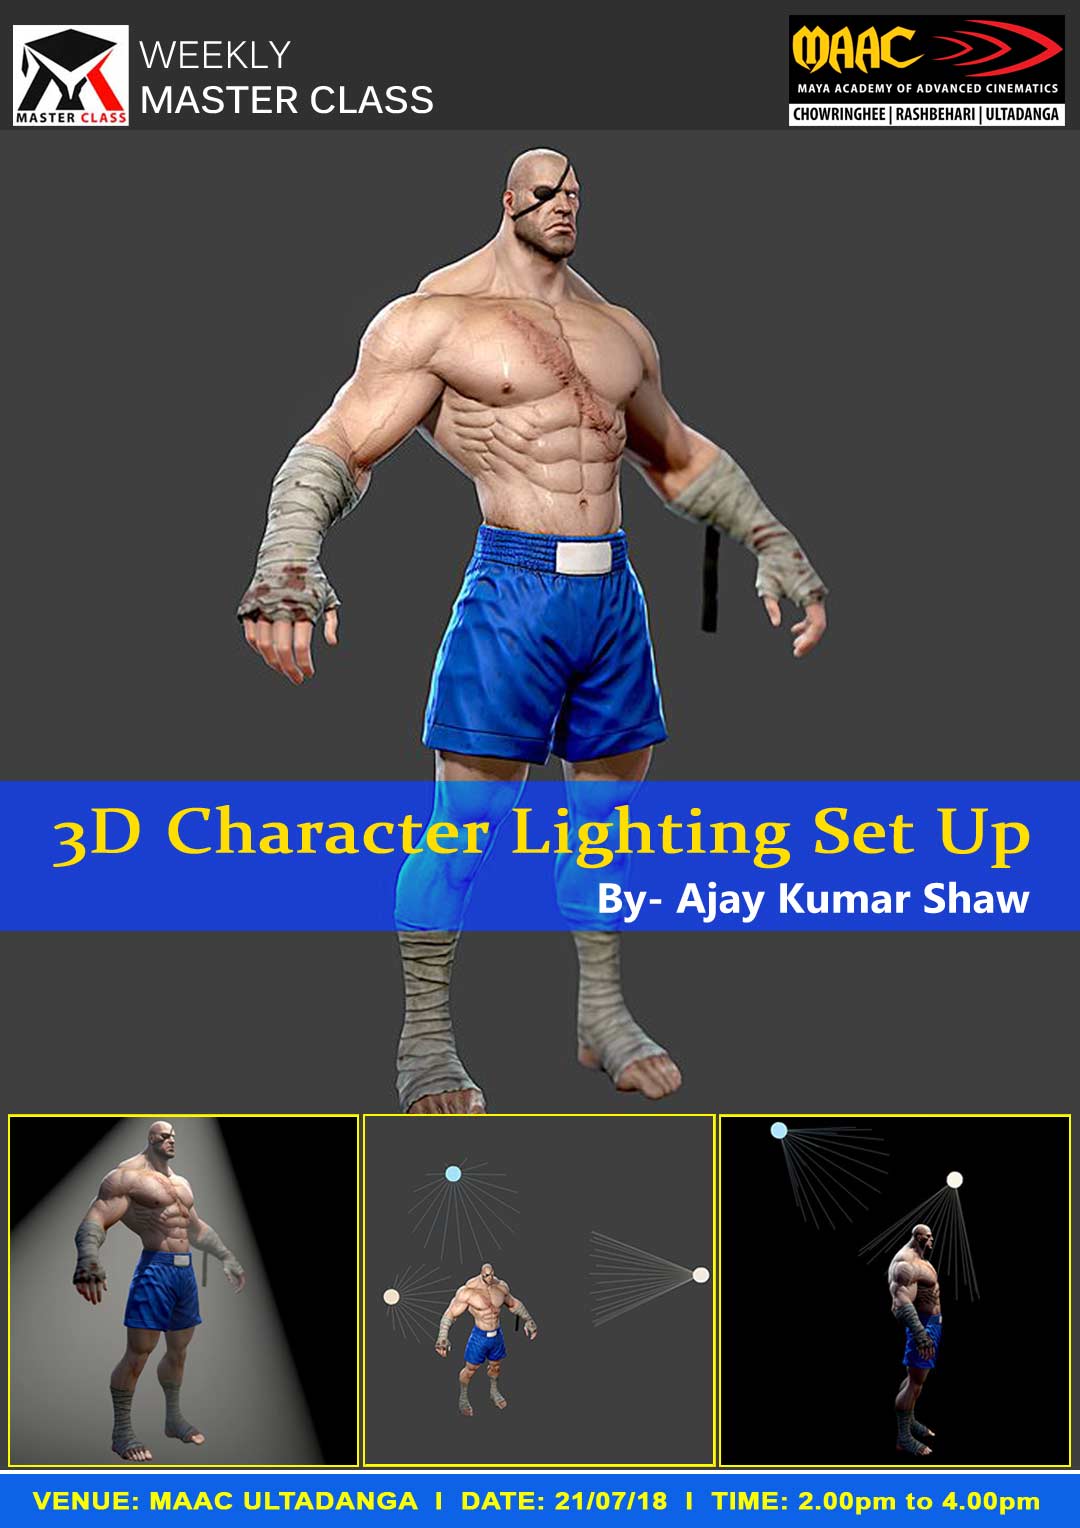 Weekly Master Class on 3D Character Lighting Set Up